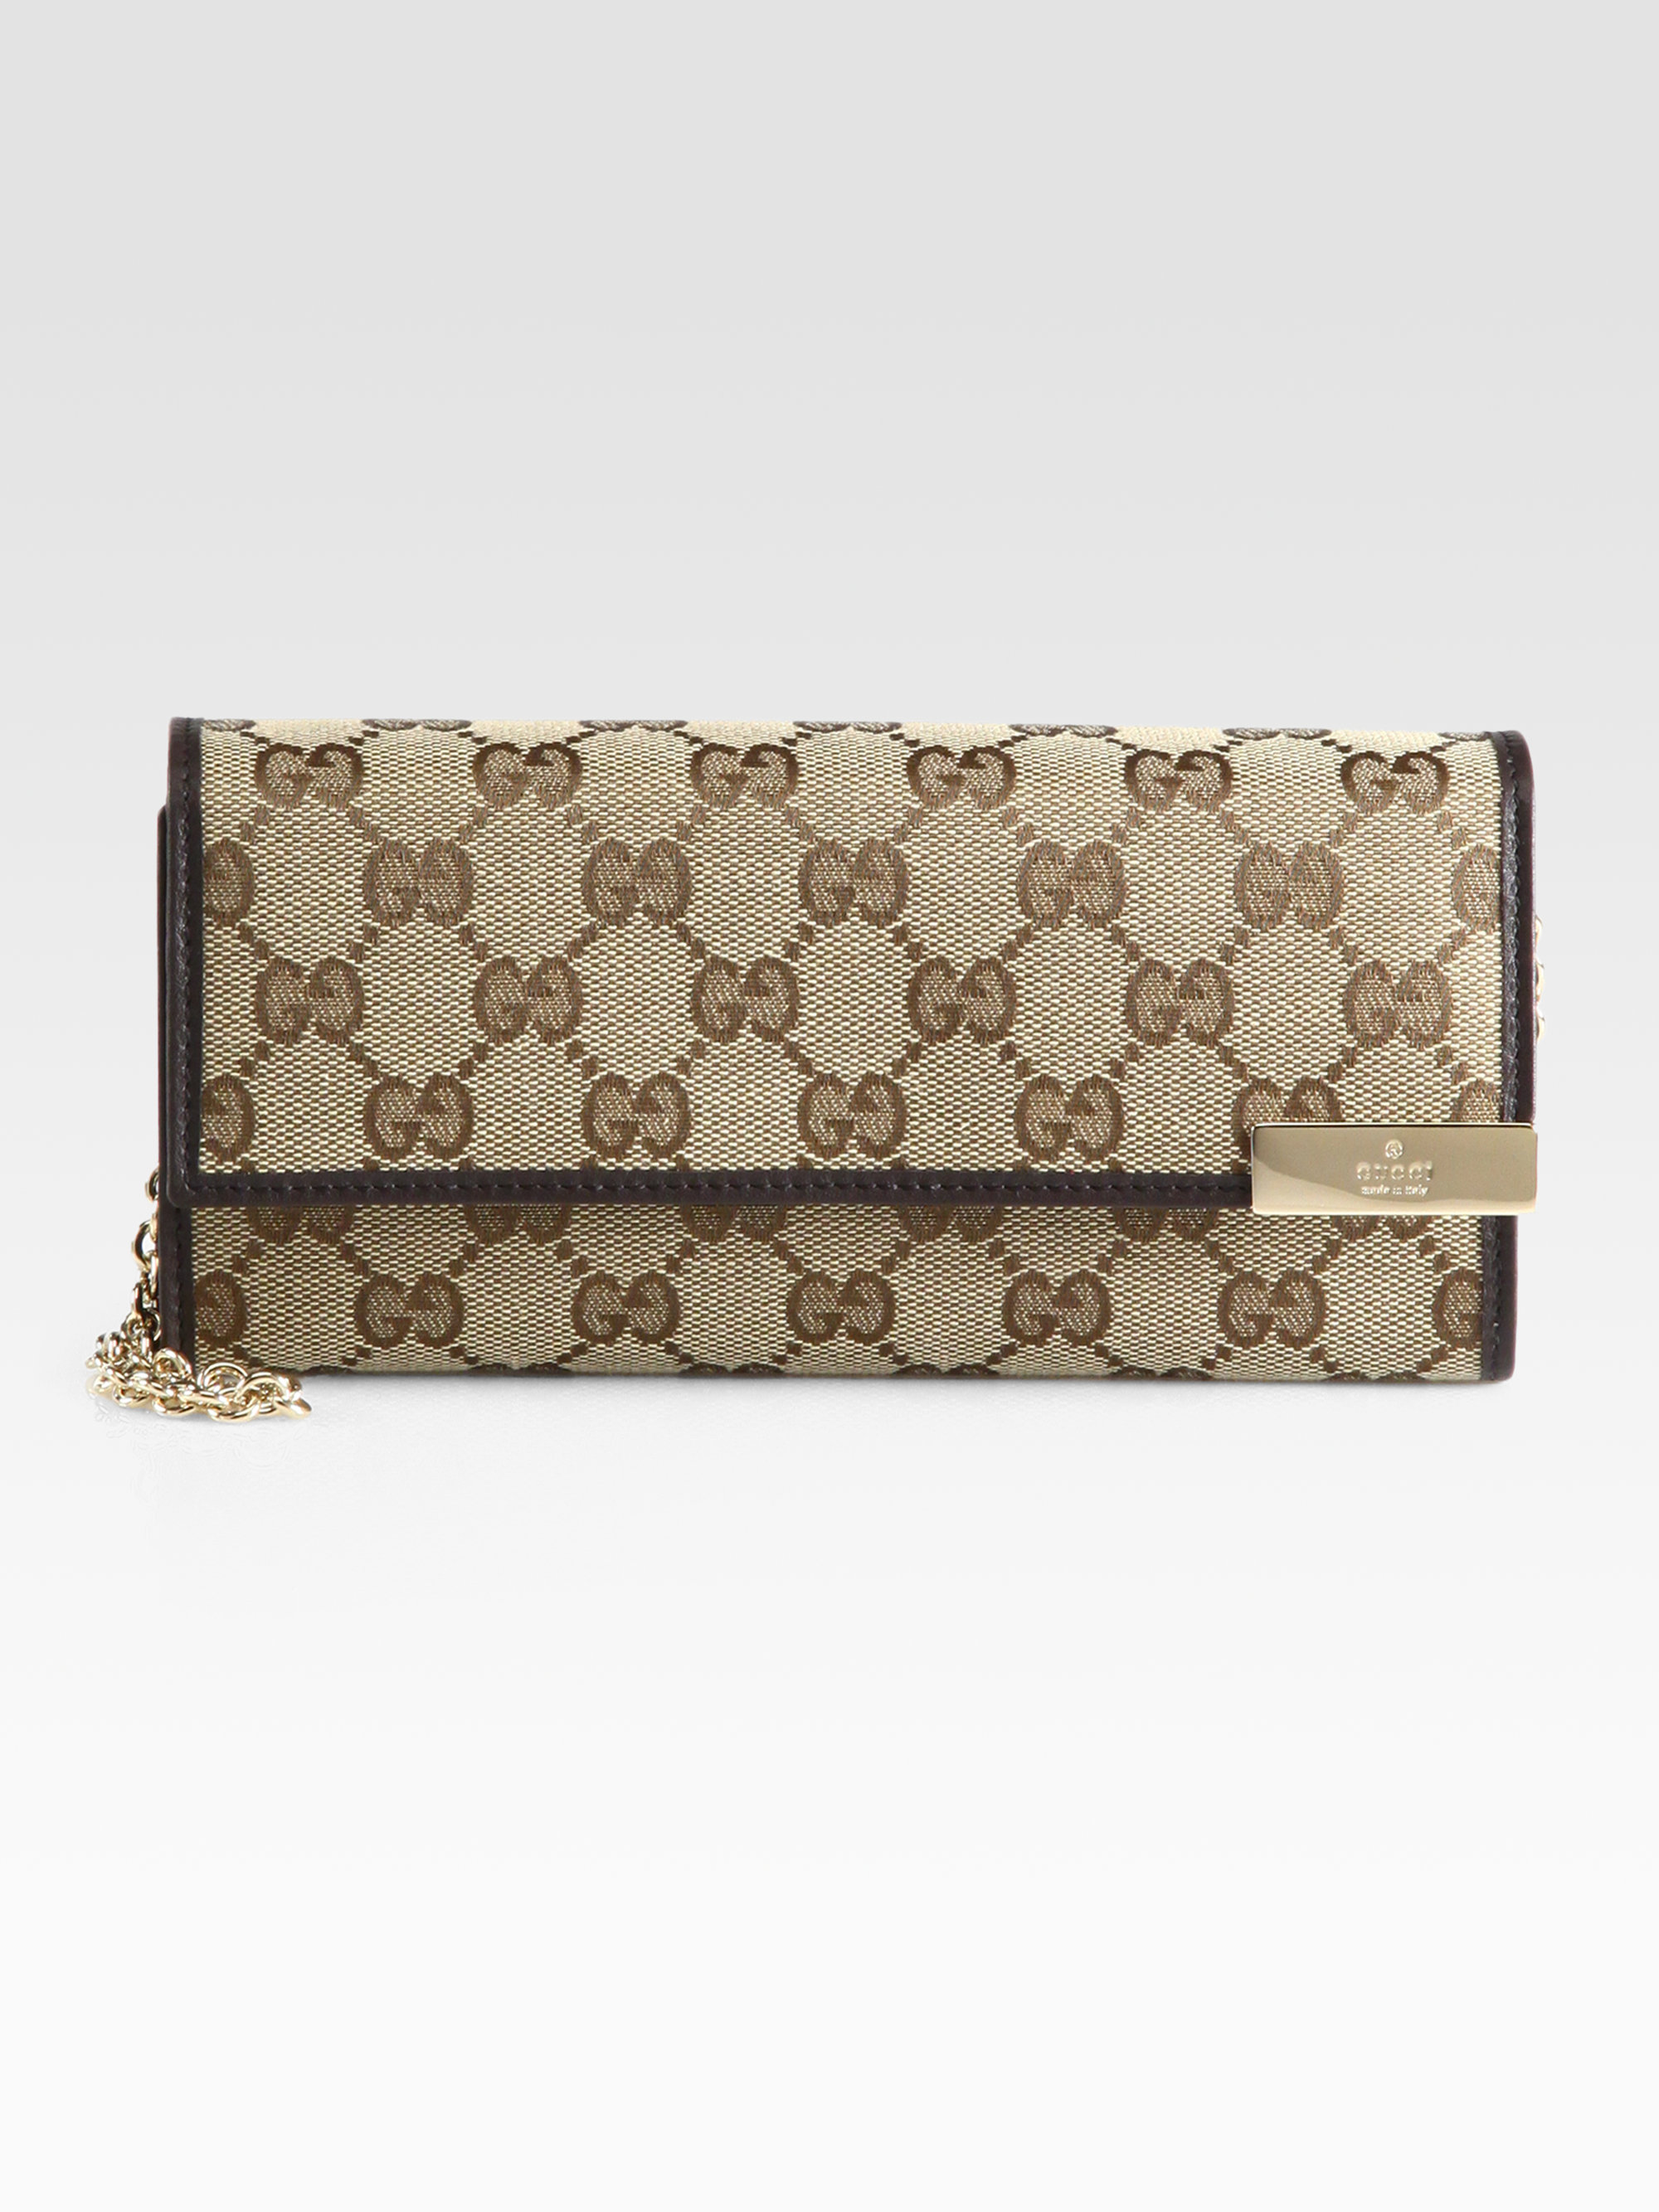 Gucci Dice Original Gg Canvas Chain Wallet in Beige (Natural) - Lyst